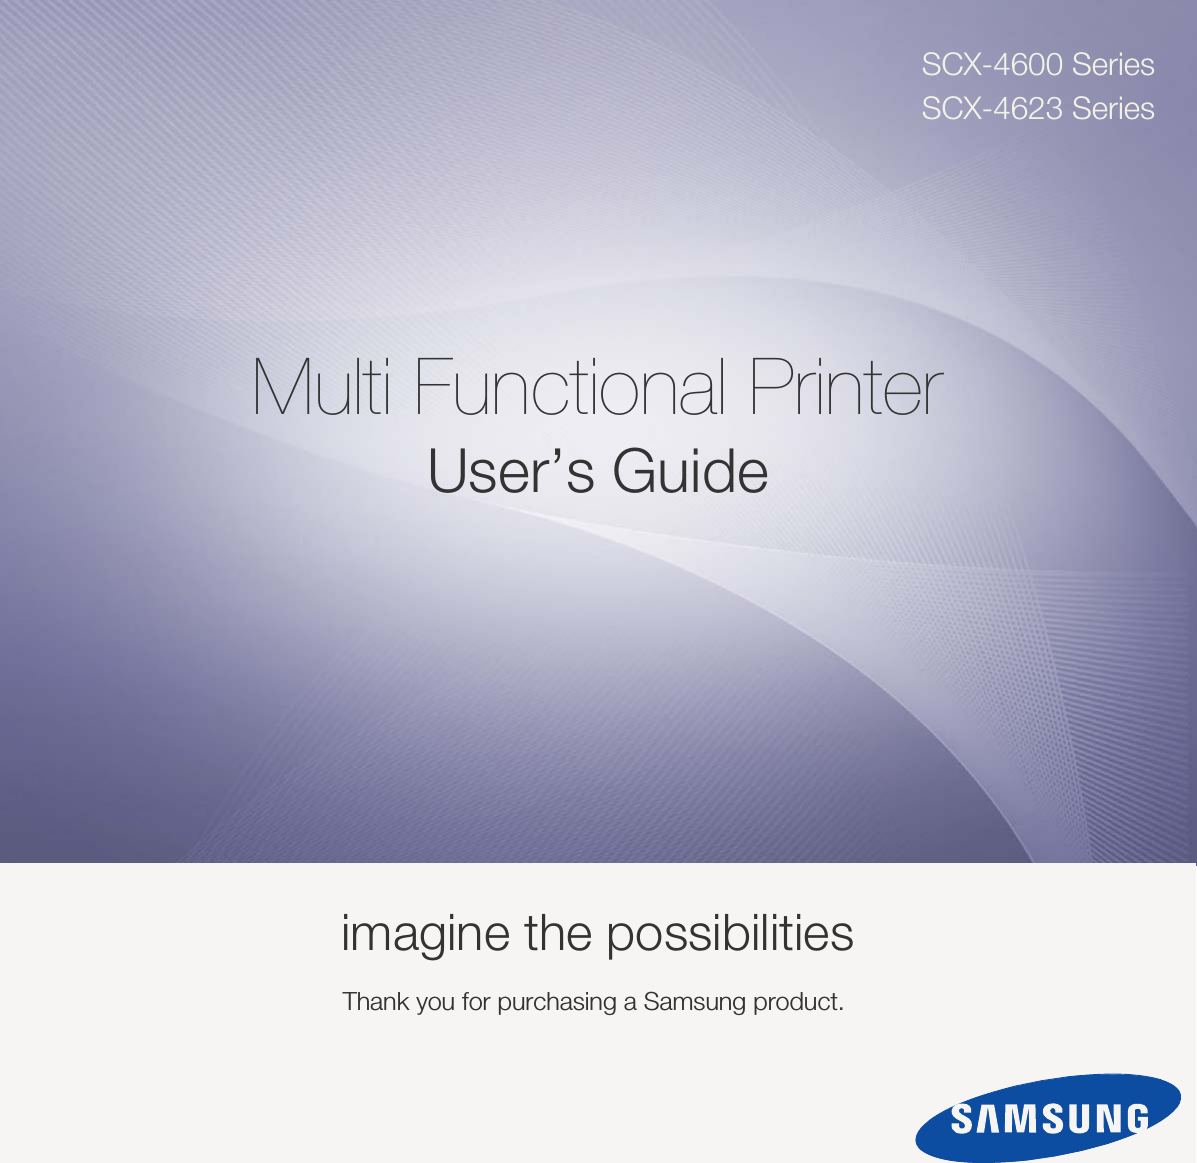 SCX-4600 SeriesSCX-4623 SeriesMulti Functional PrinterUser’s Guideimagine the possibilitiesThank you for purchasing a Samsung product.